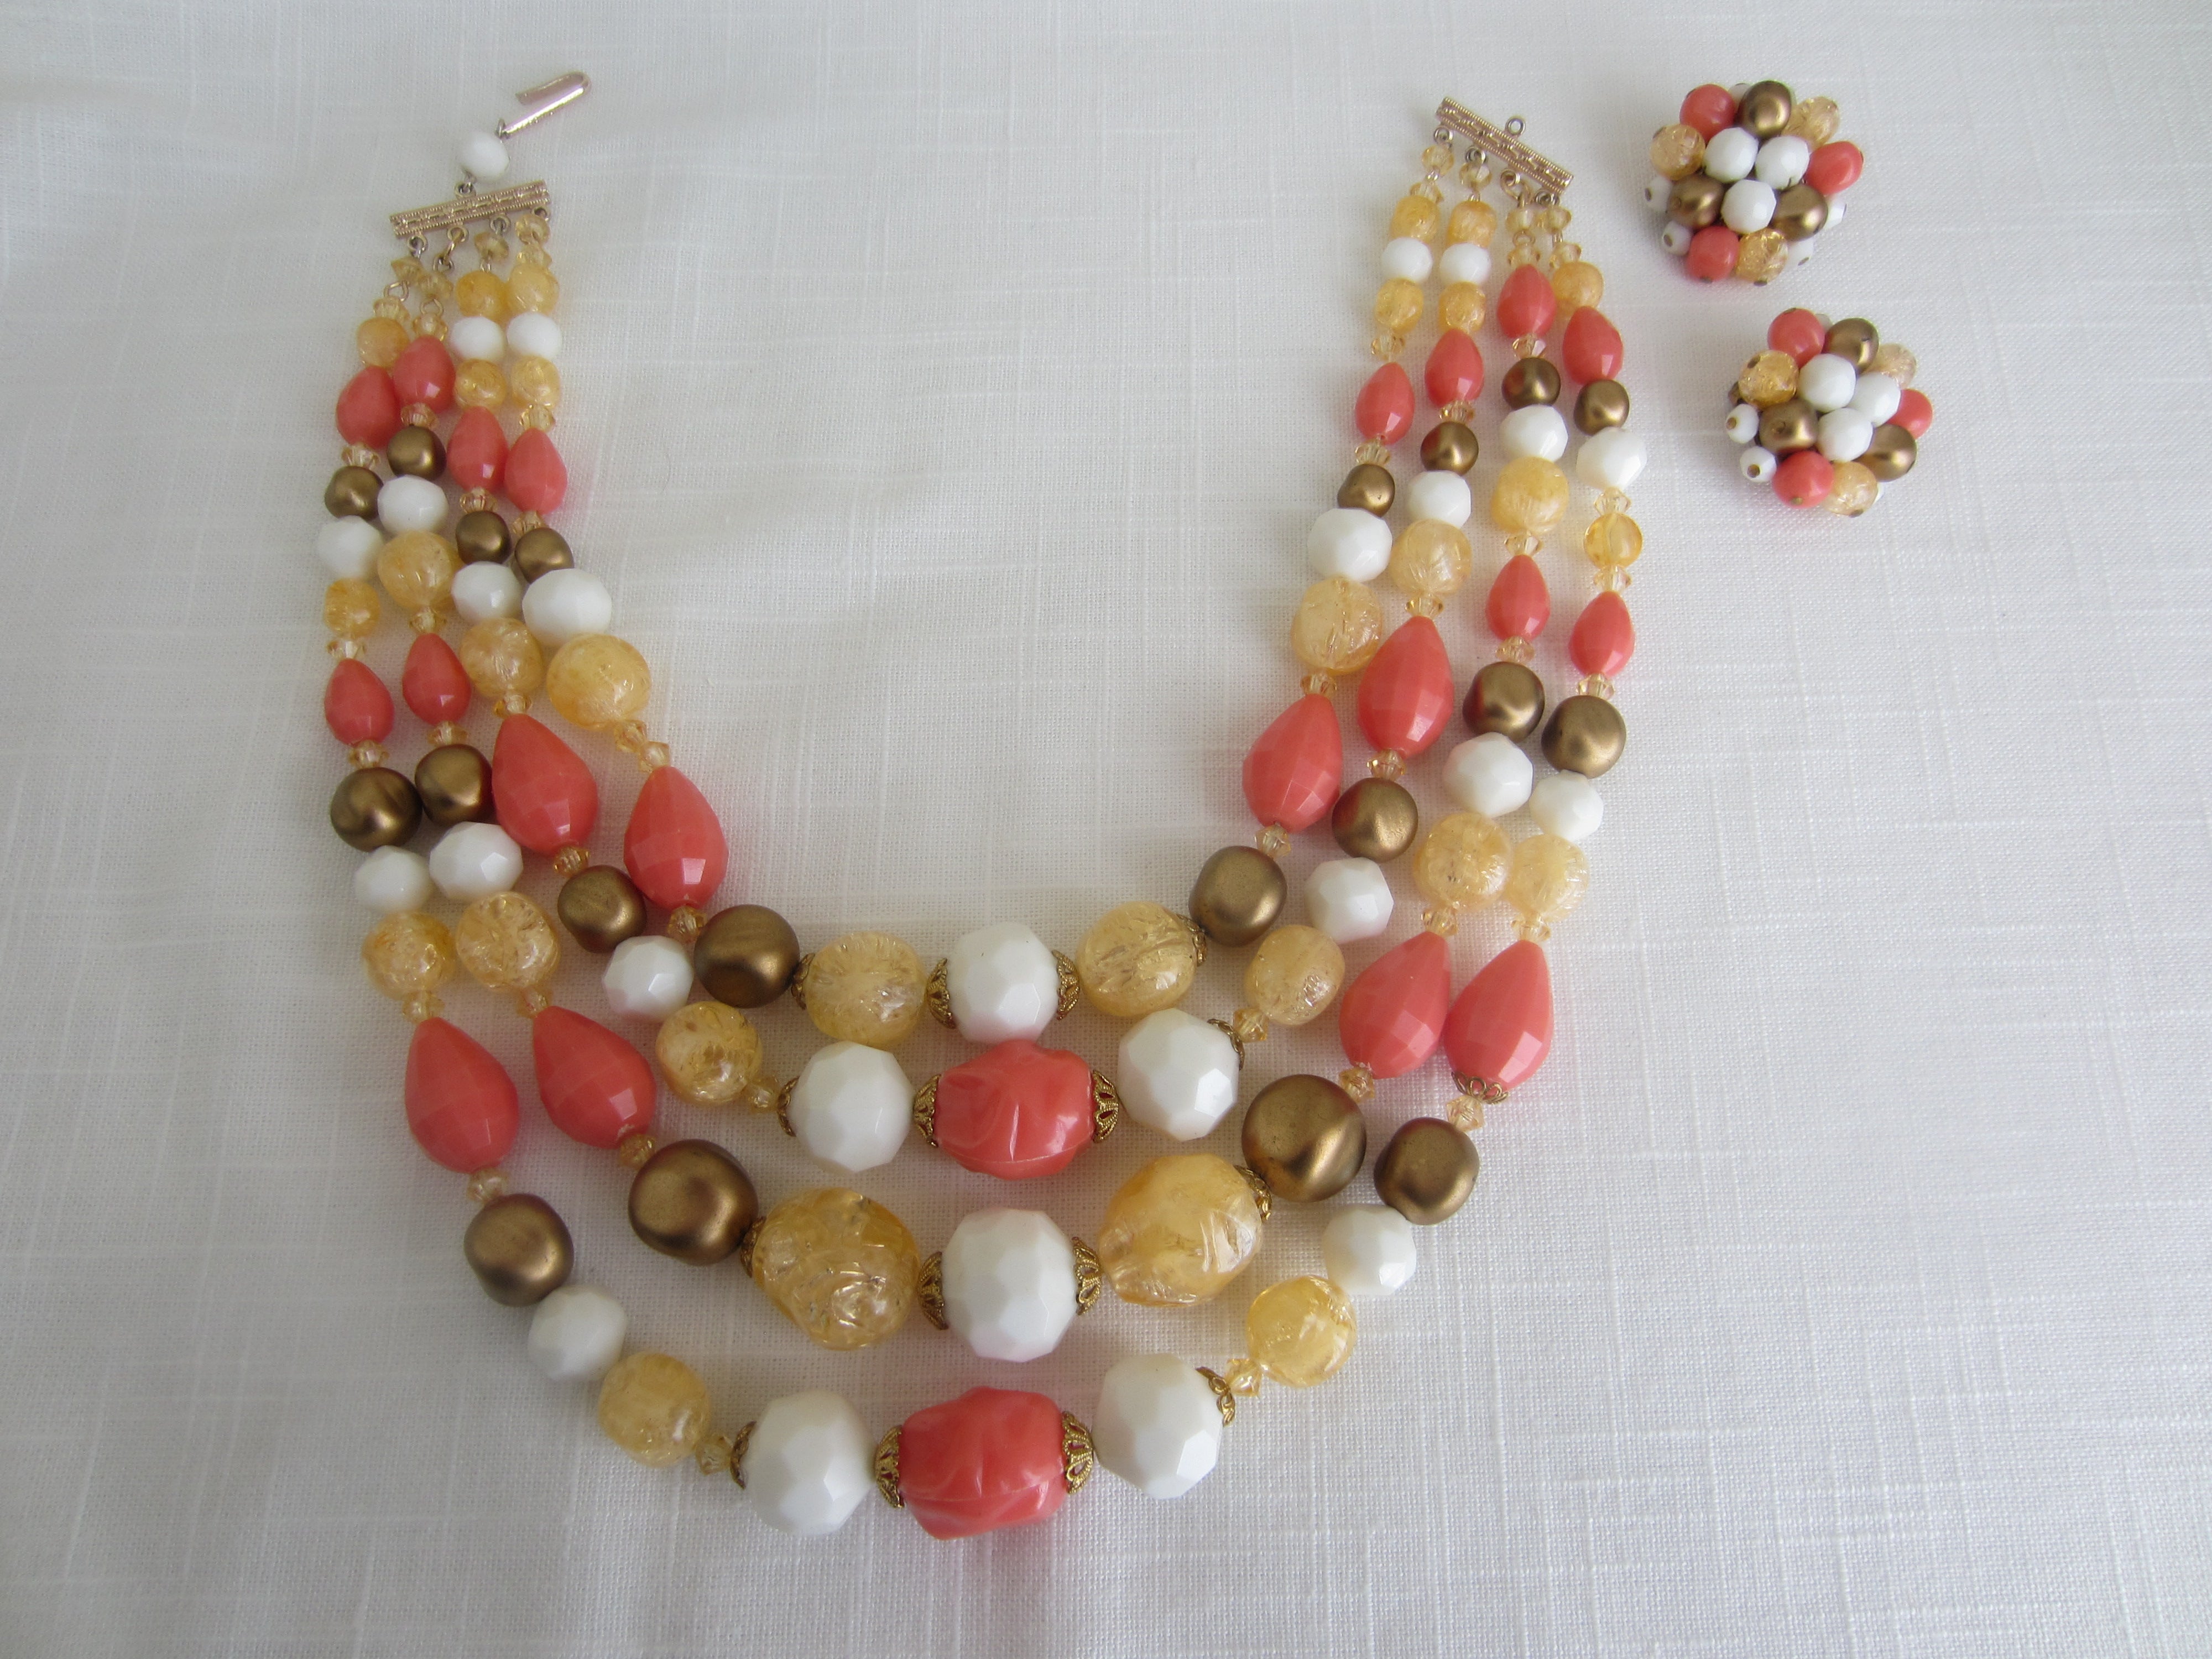 Vintage Multi Strand Beaded Necklace and Earrings Set